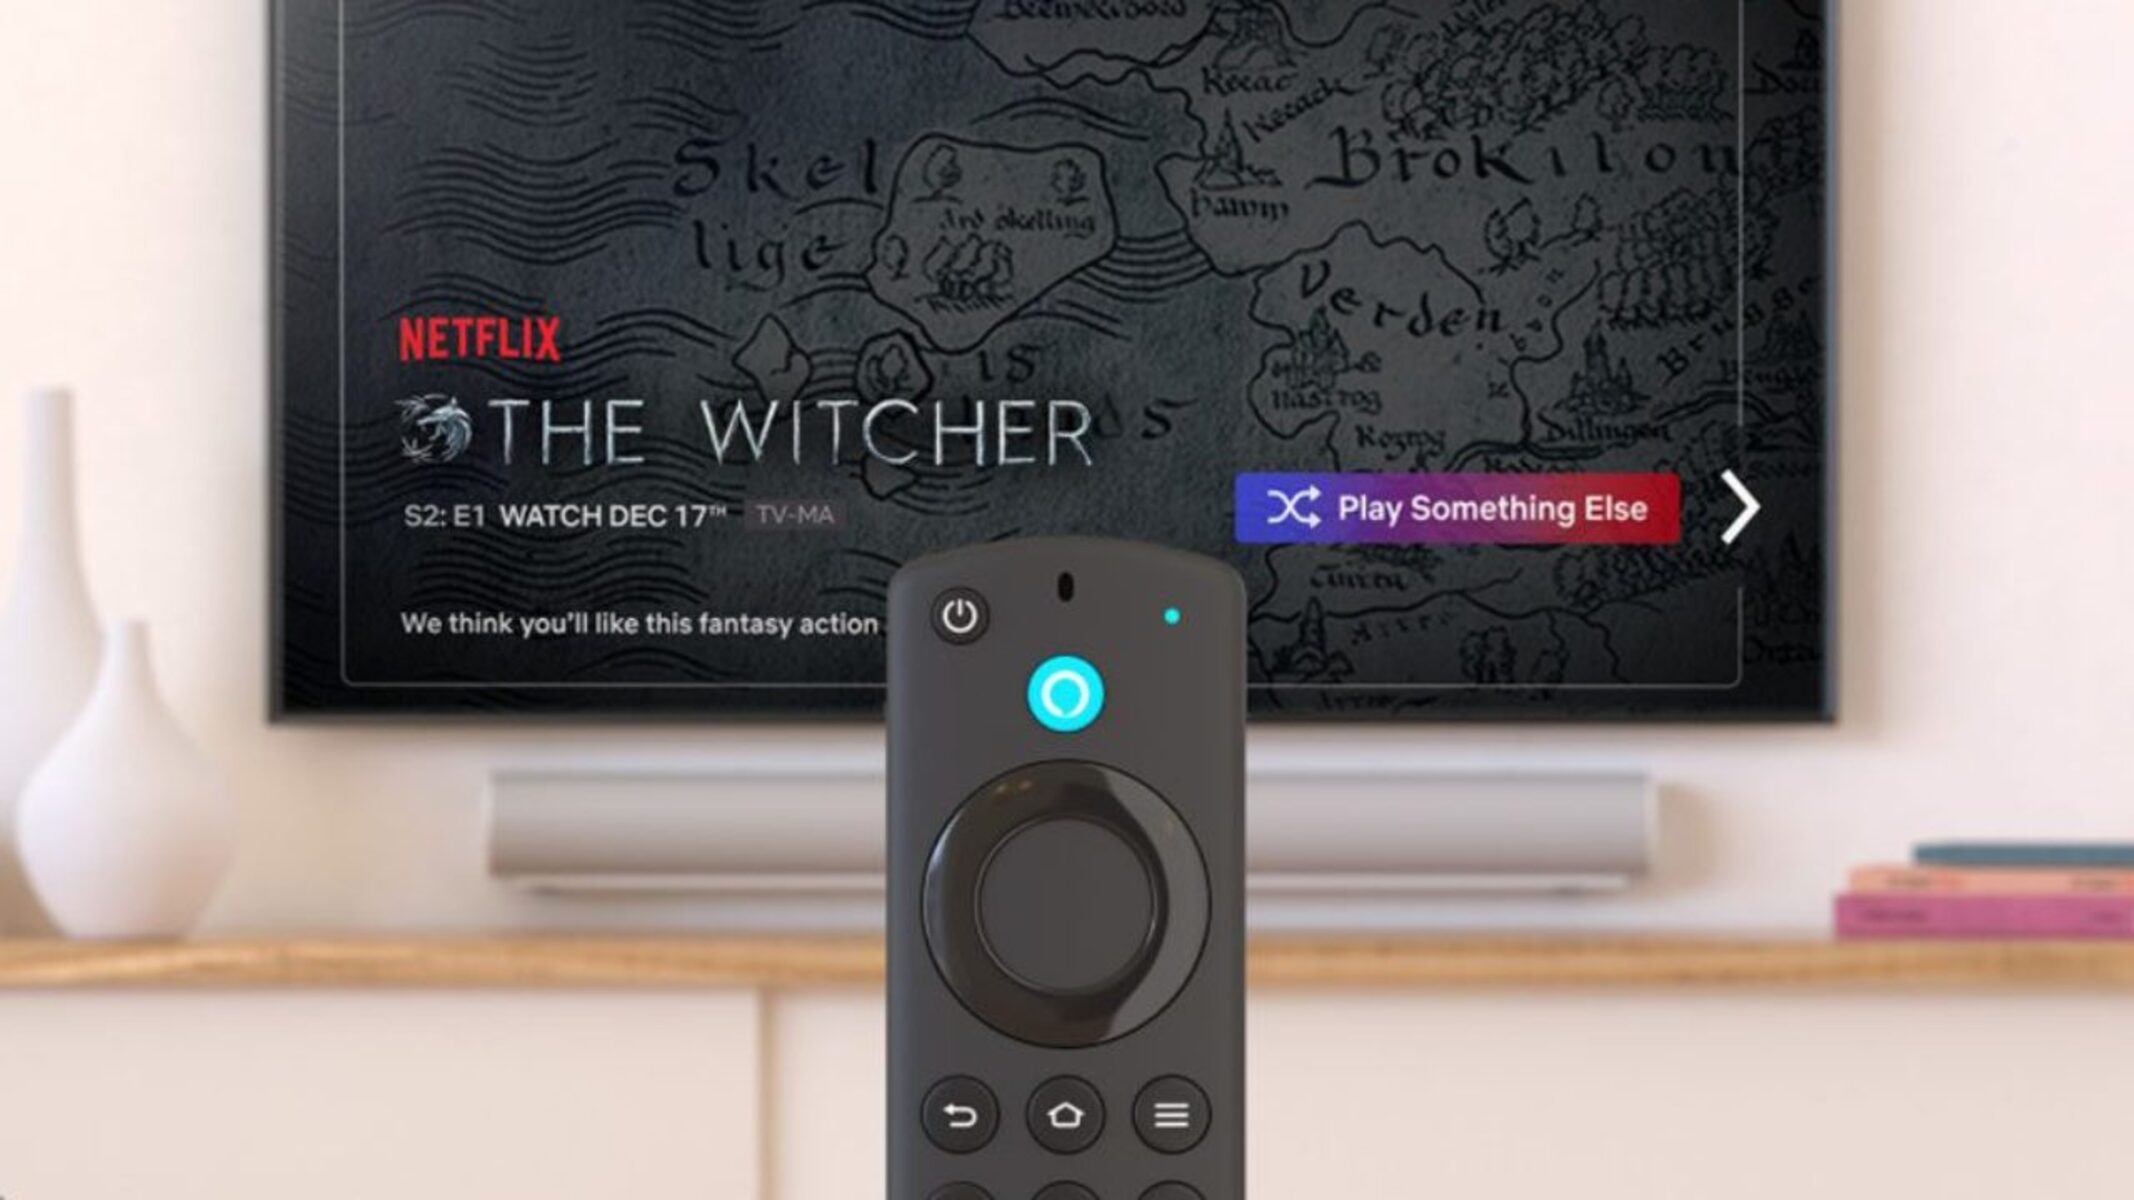 alexa-can-now-choose-something-for-you-to-watch-on-netflix